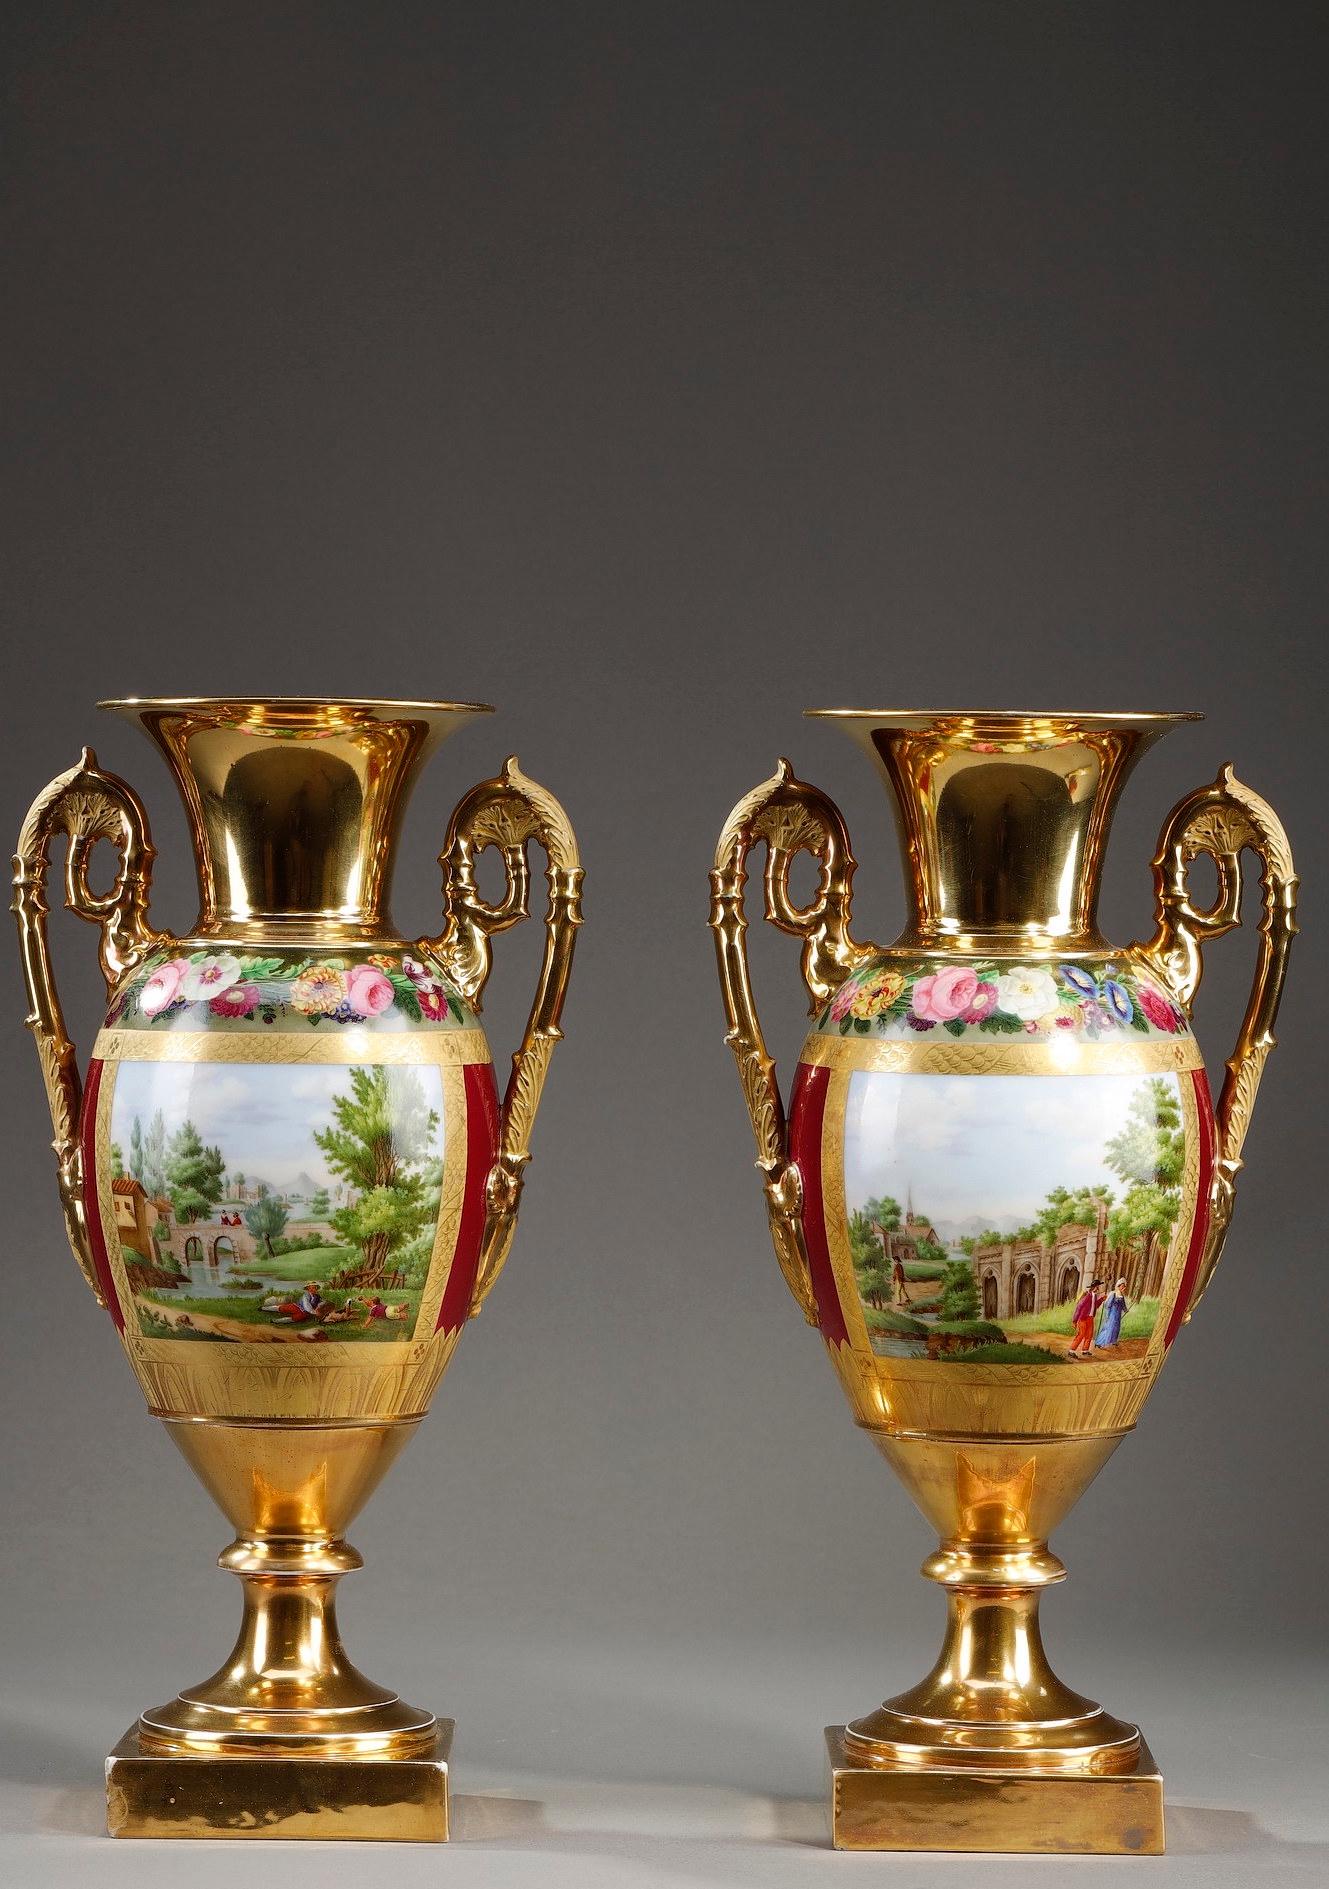 Antique style pair of vases in the form of amphorae in polychromed porcelain from Paris. On a gold and burgundy background, stands out a medallion with a white background with fruits on one side and idealized bucolic landscapes in a golden frame on